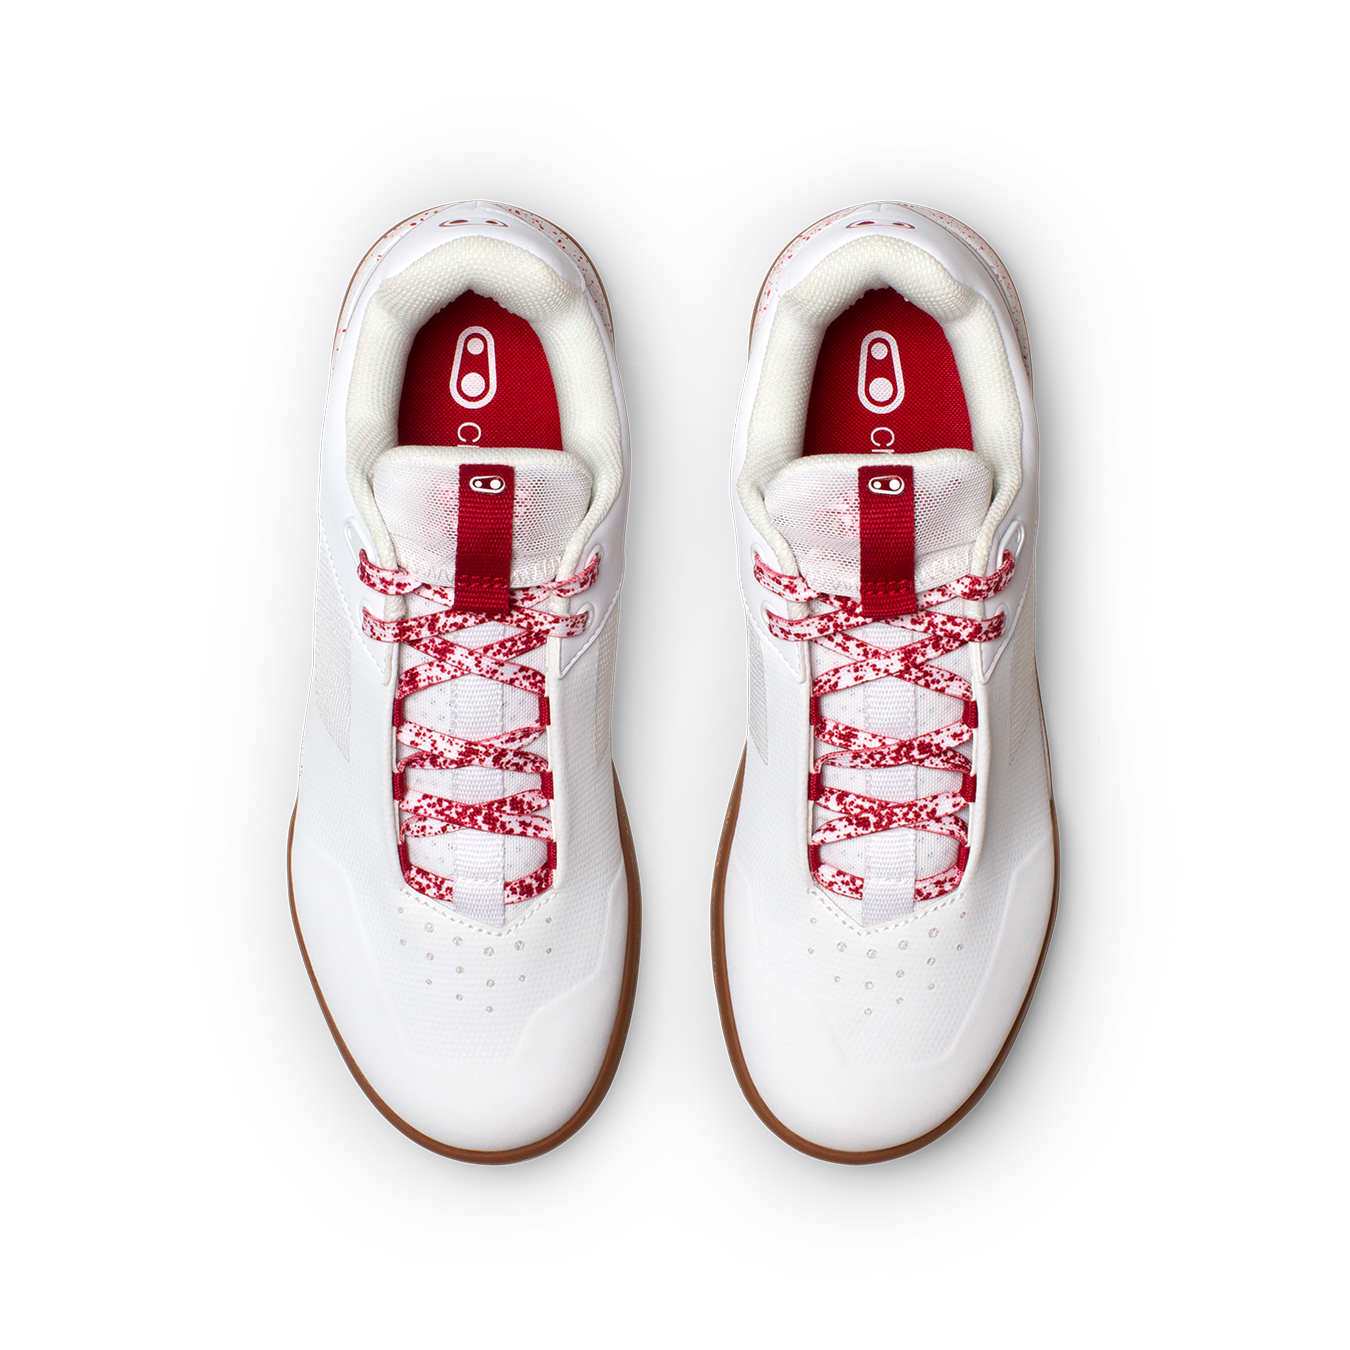 Crank Brothers Stamp Lace Flat Shoes - US 10 - White - Red Splatter